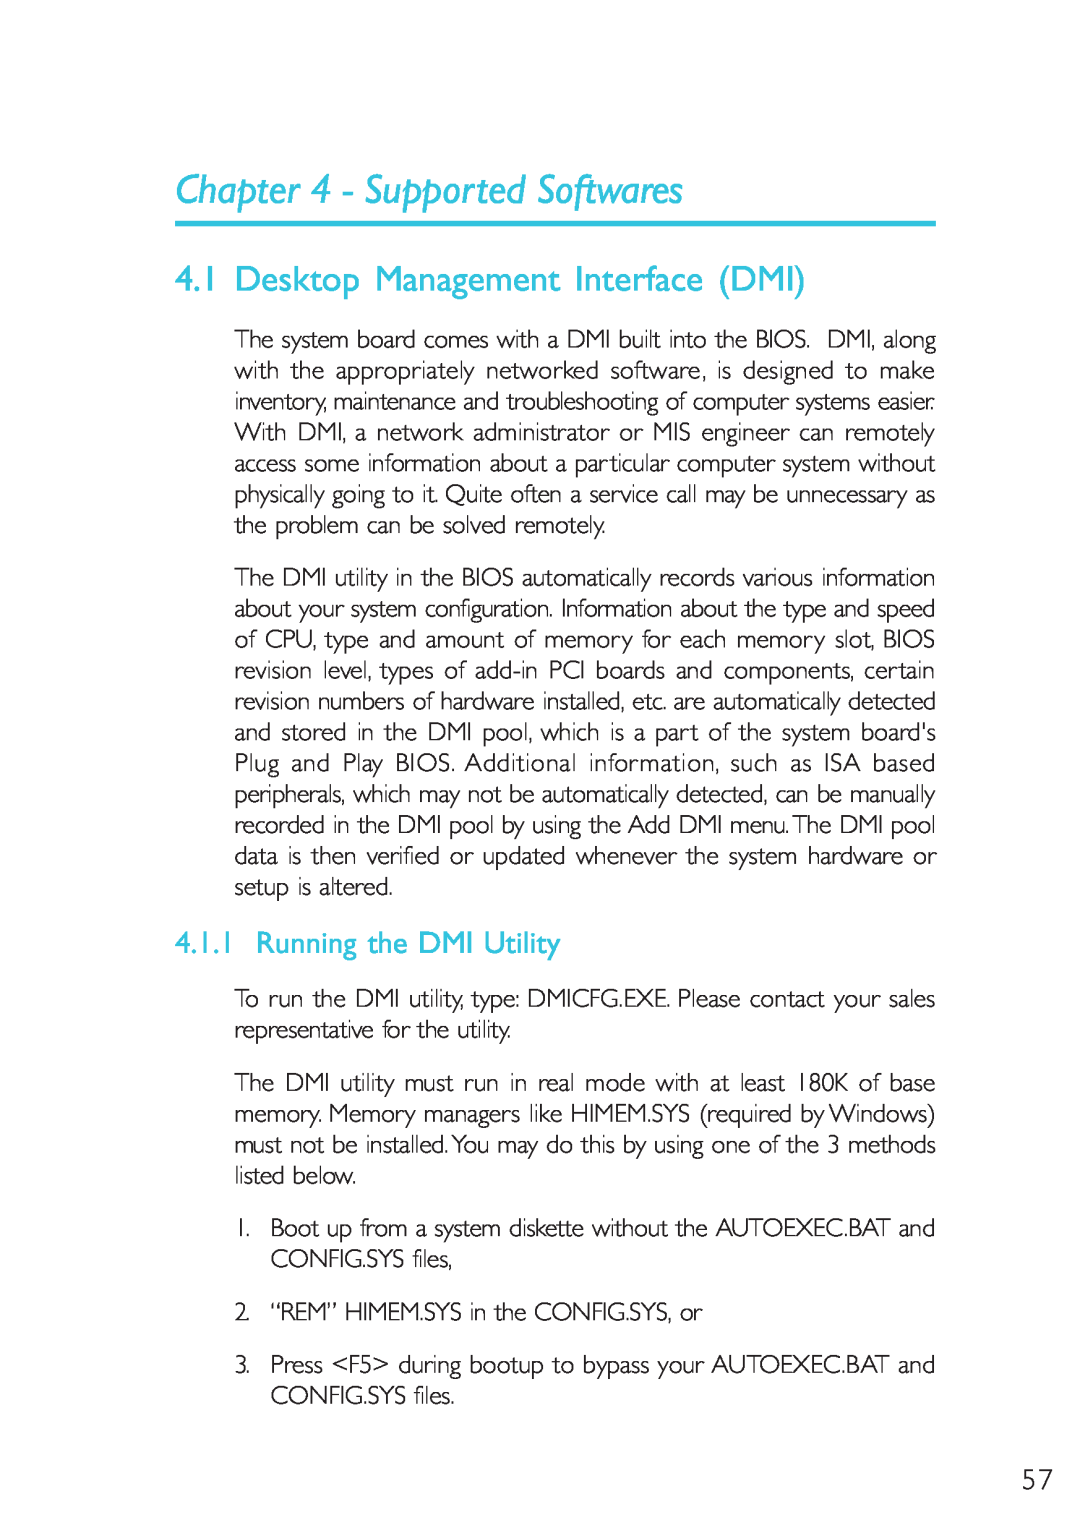 Microsoft G7VP2 manual Supported Softwares, Desktop Management Interface DMI, Running the DMI Utility 